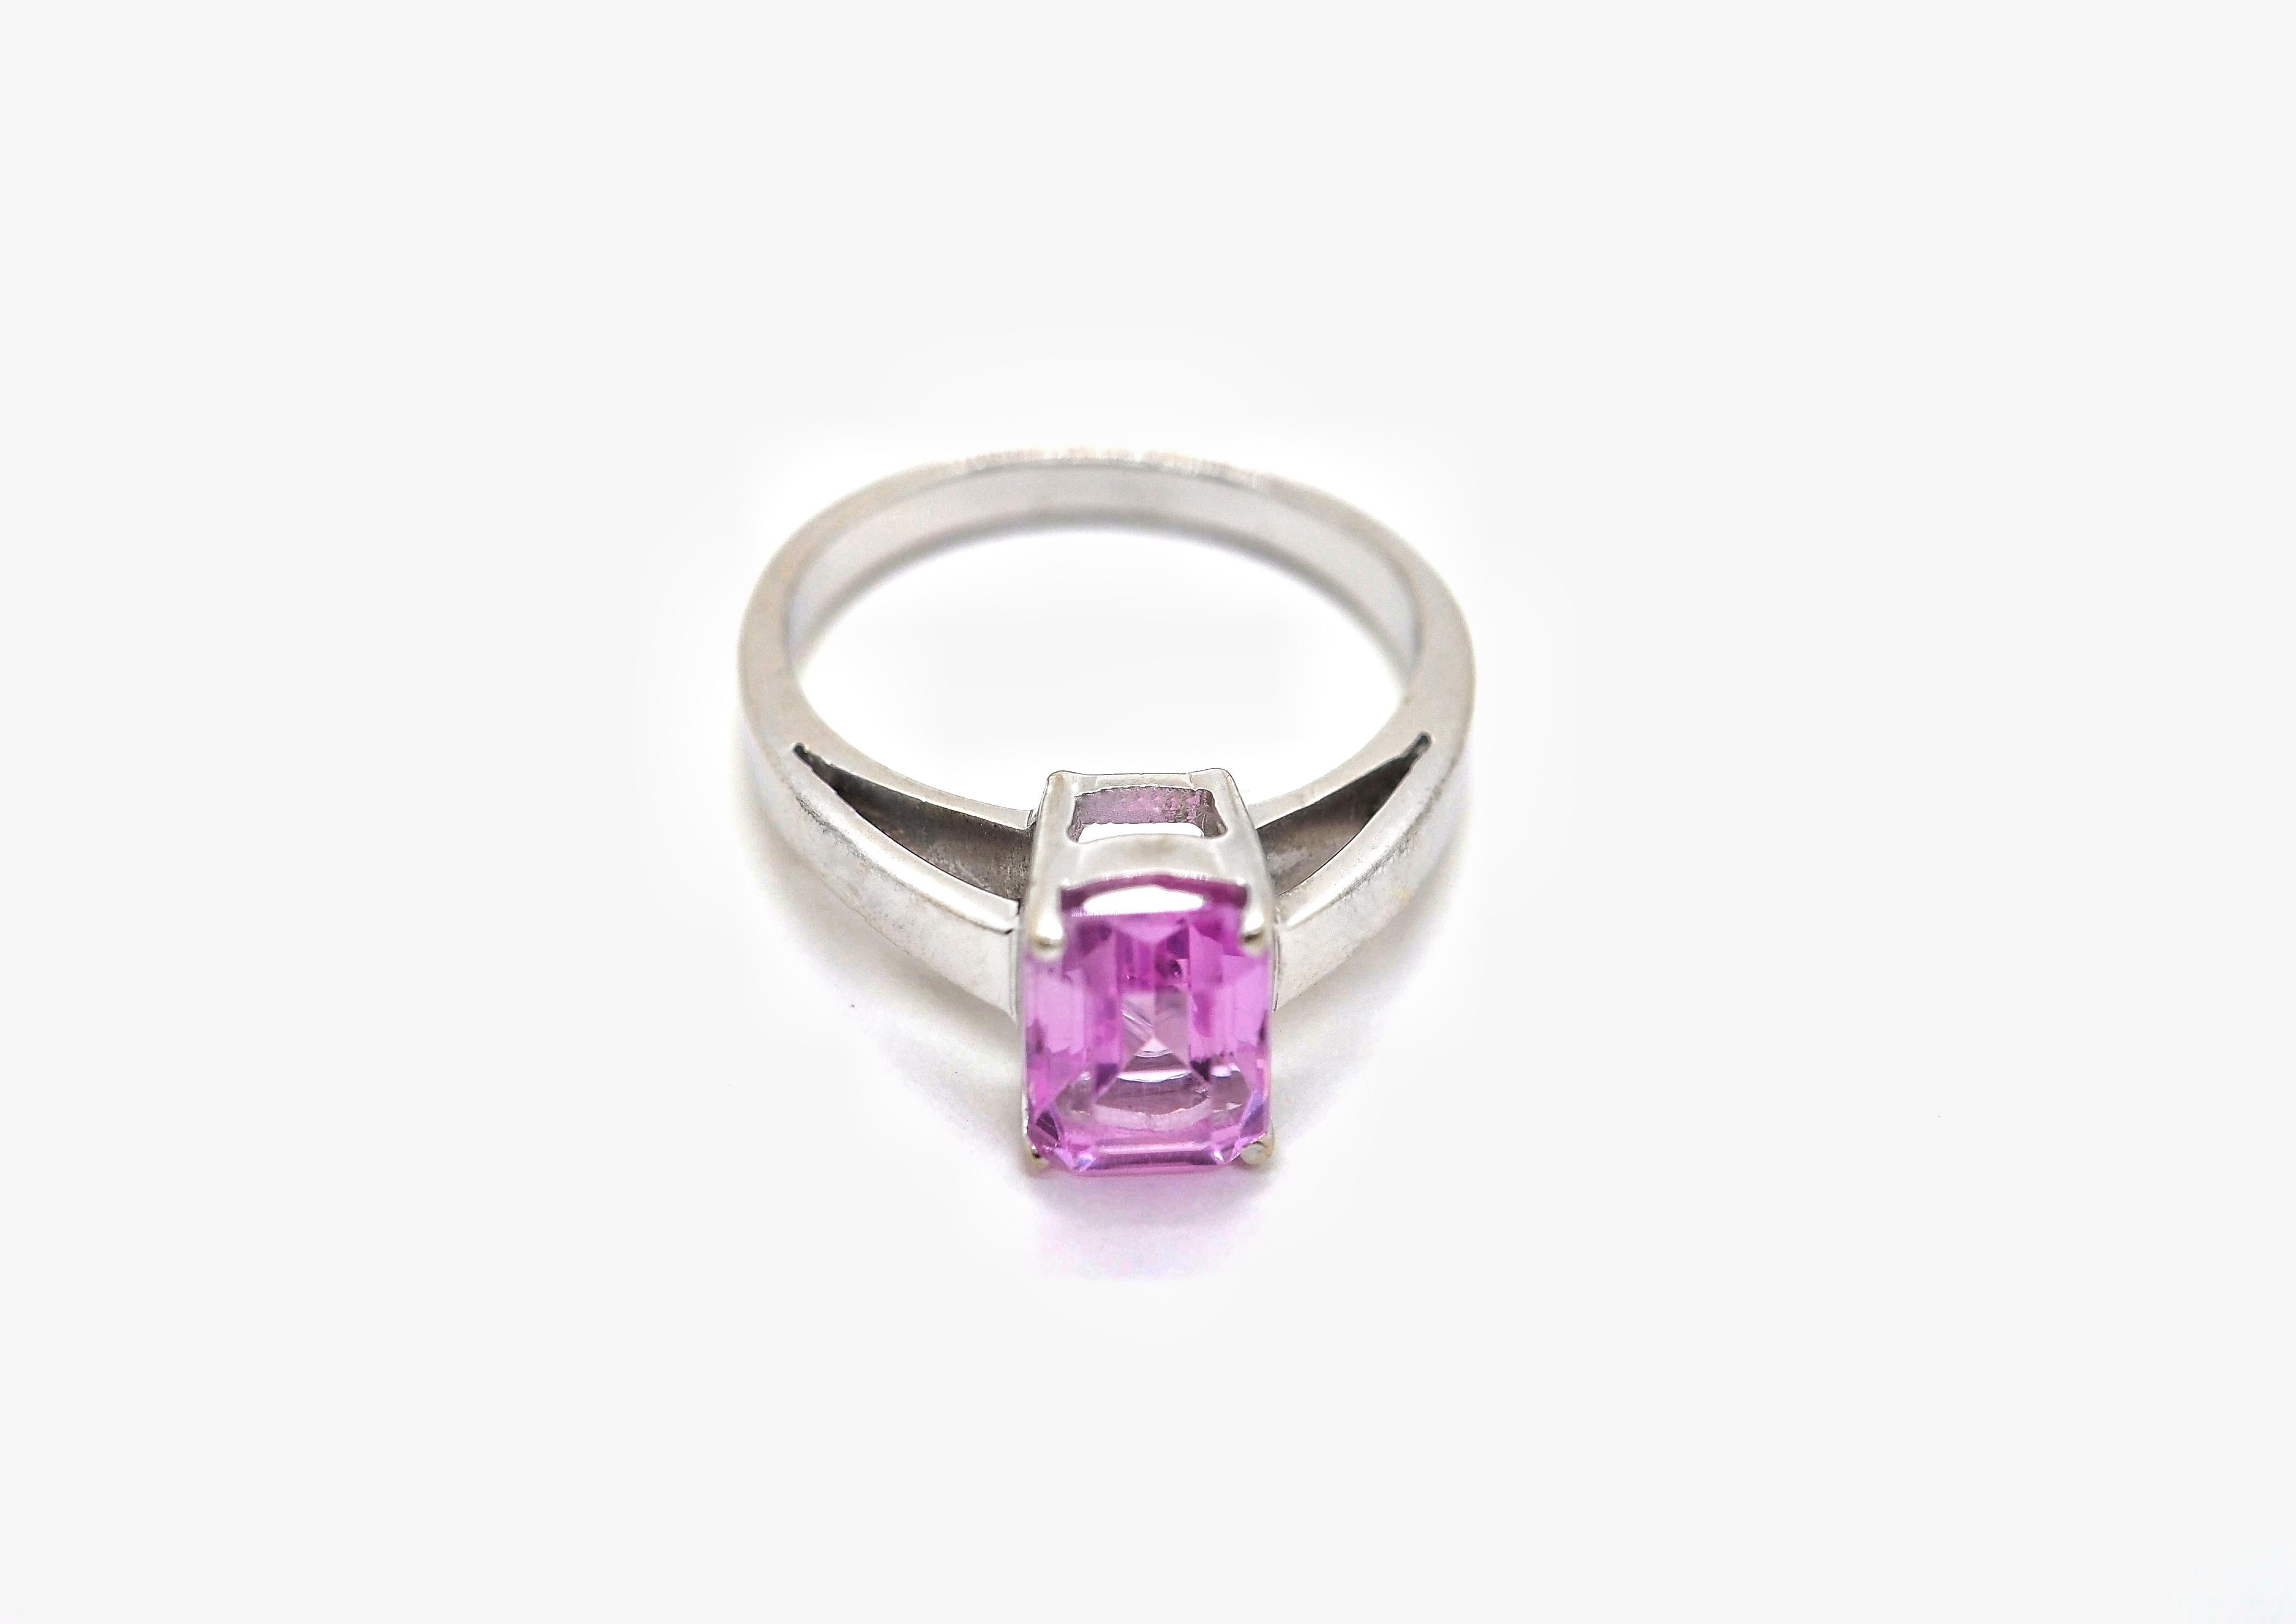 Sophisticated 18K white gold ring, featuring a captivating pink sapphire at its heart. With its classic solitaire ring design and stunning gemstone, this ring is a perfect blend of traditional charm and contemporary elegance.

Material: Finely